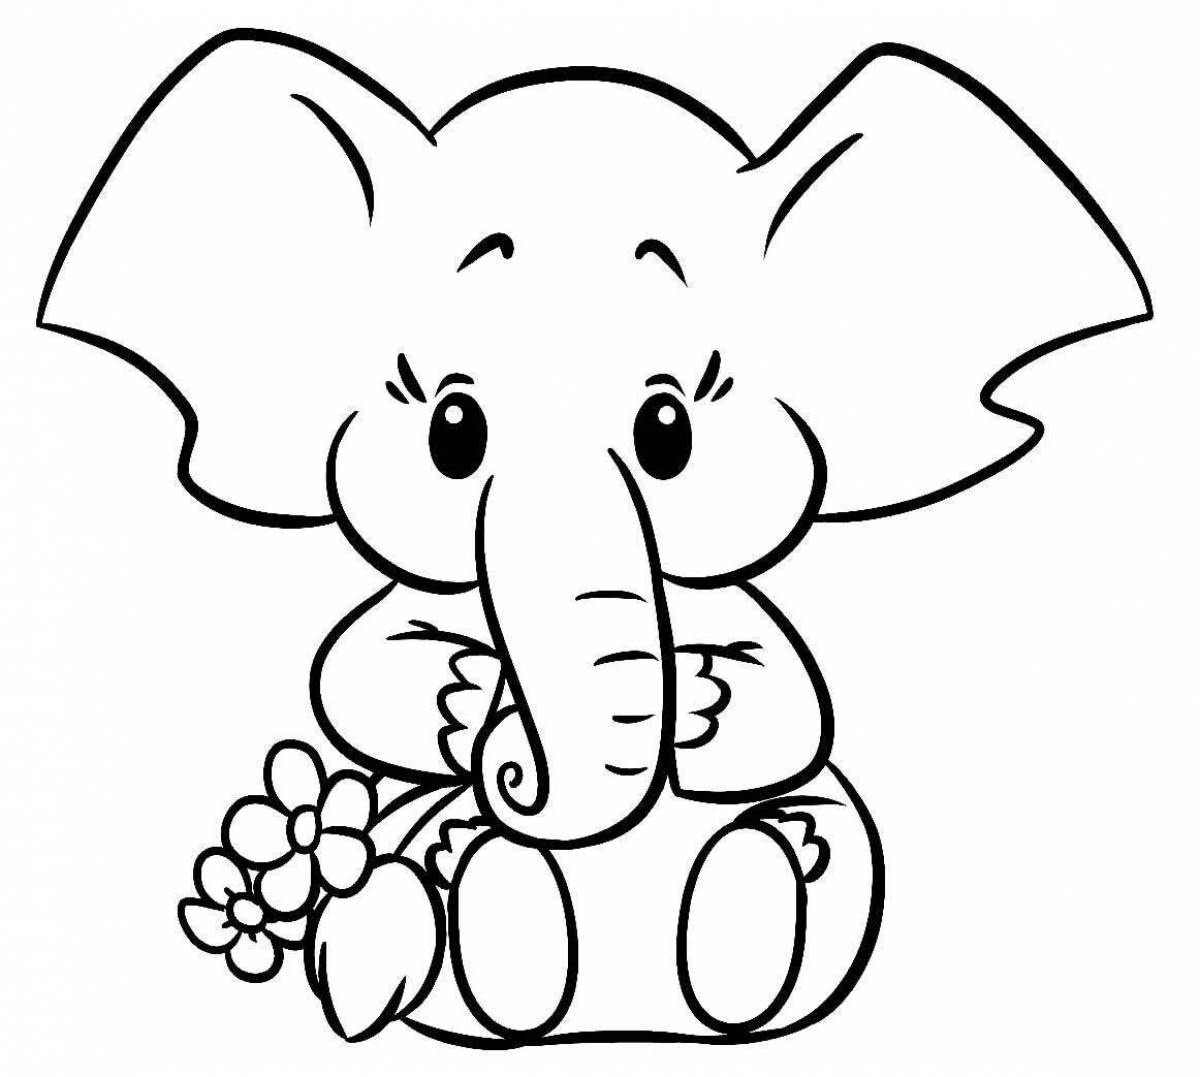 Coloring bright elephant for children 3-4 years old